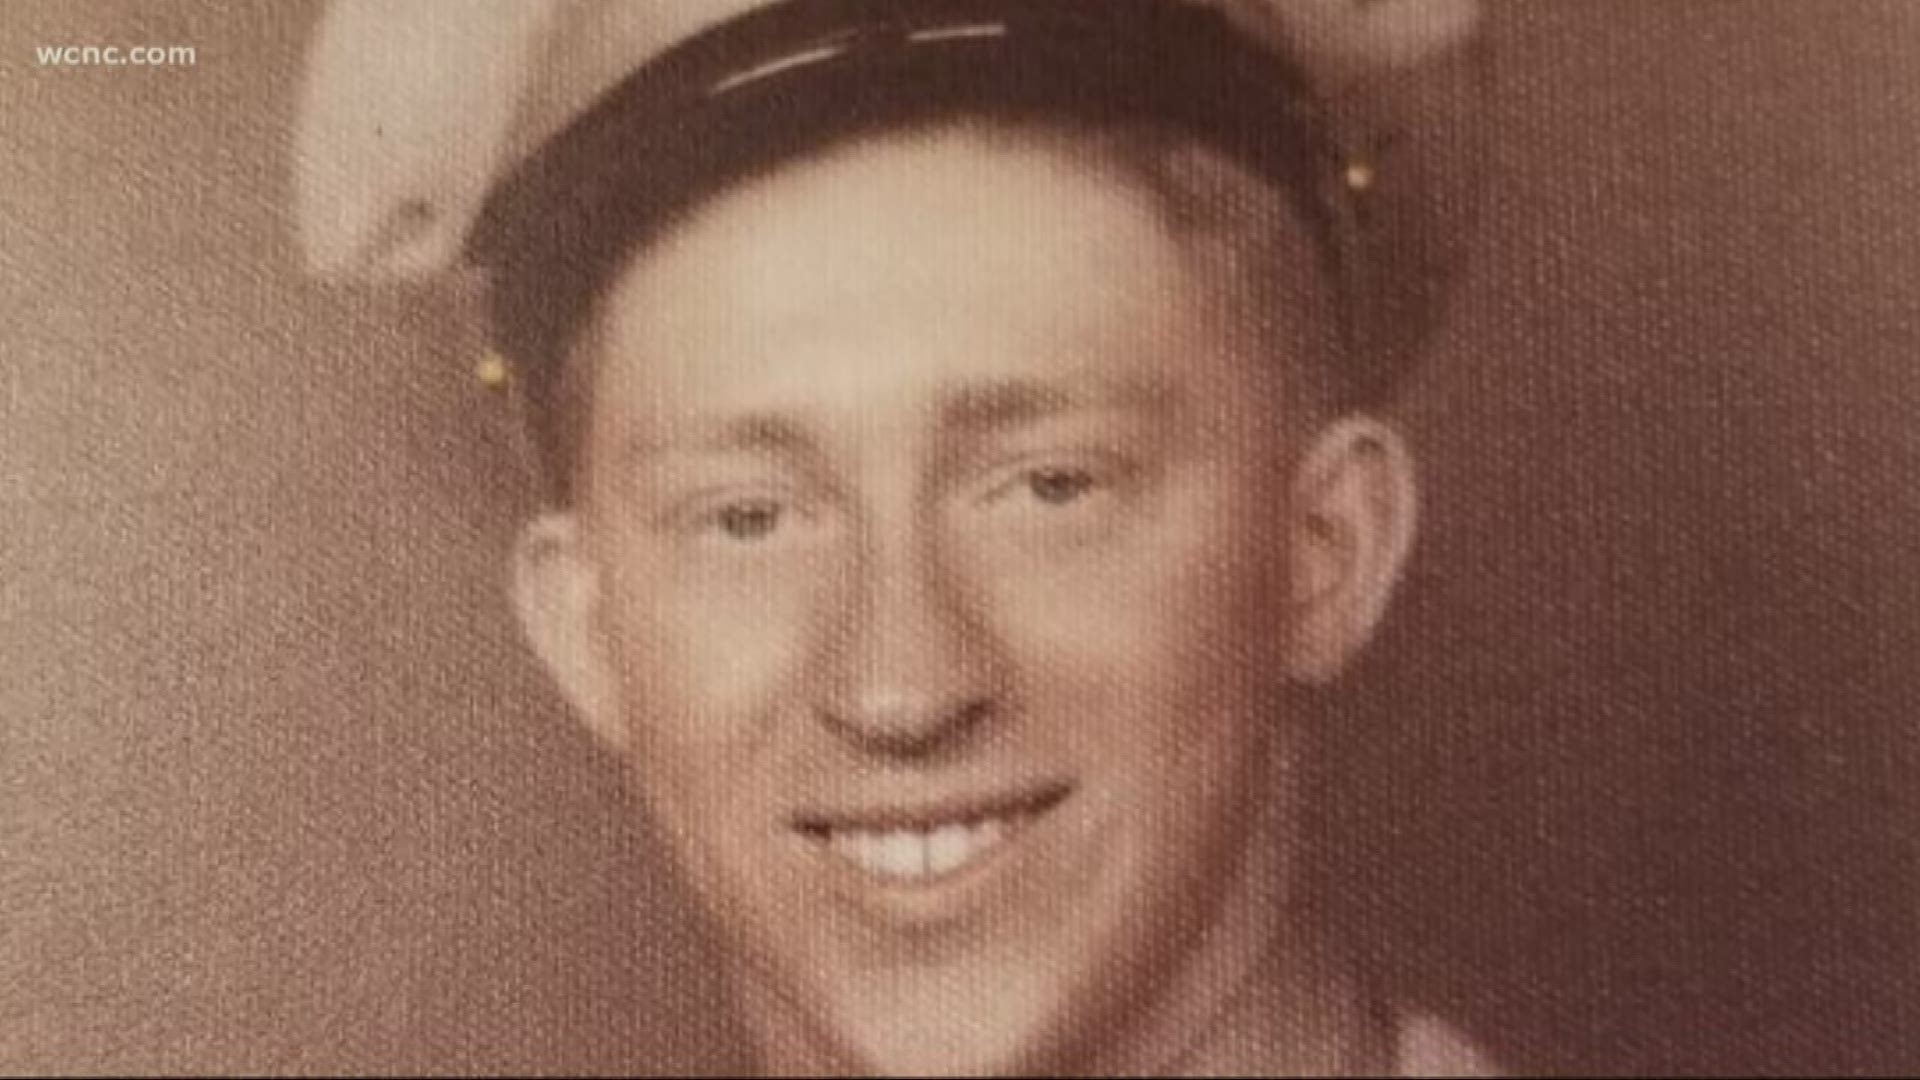 Joe Houser stormed the beaches of Normandy on D-Day and did more than survive World War II, he built a life and family back home.